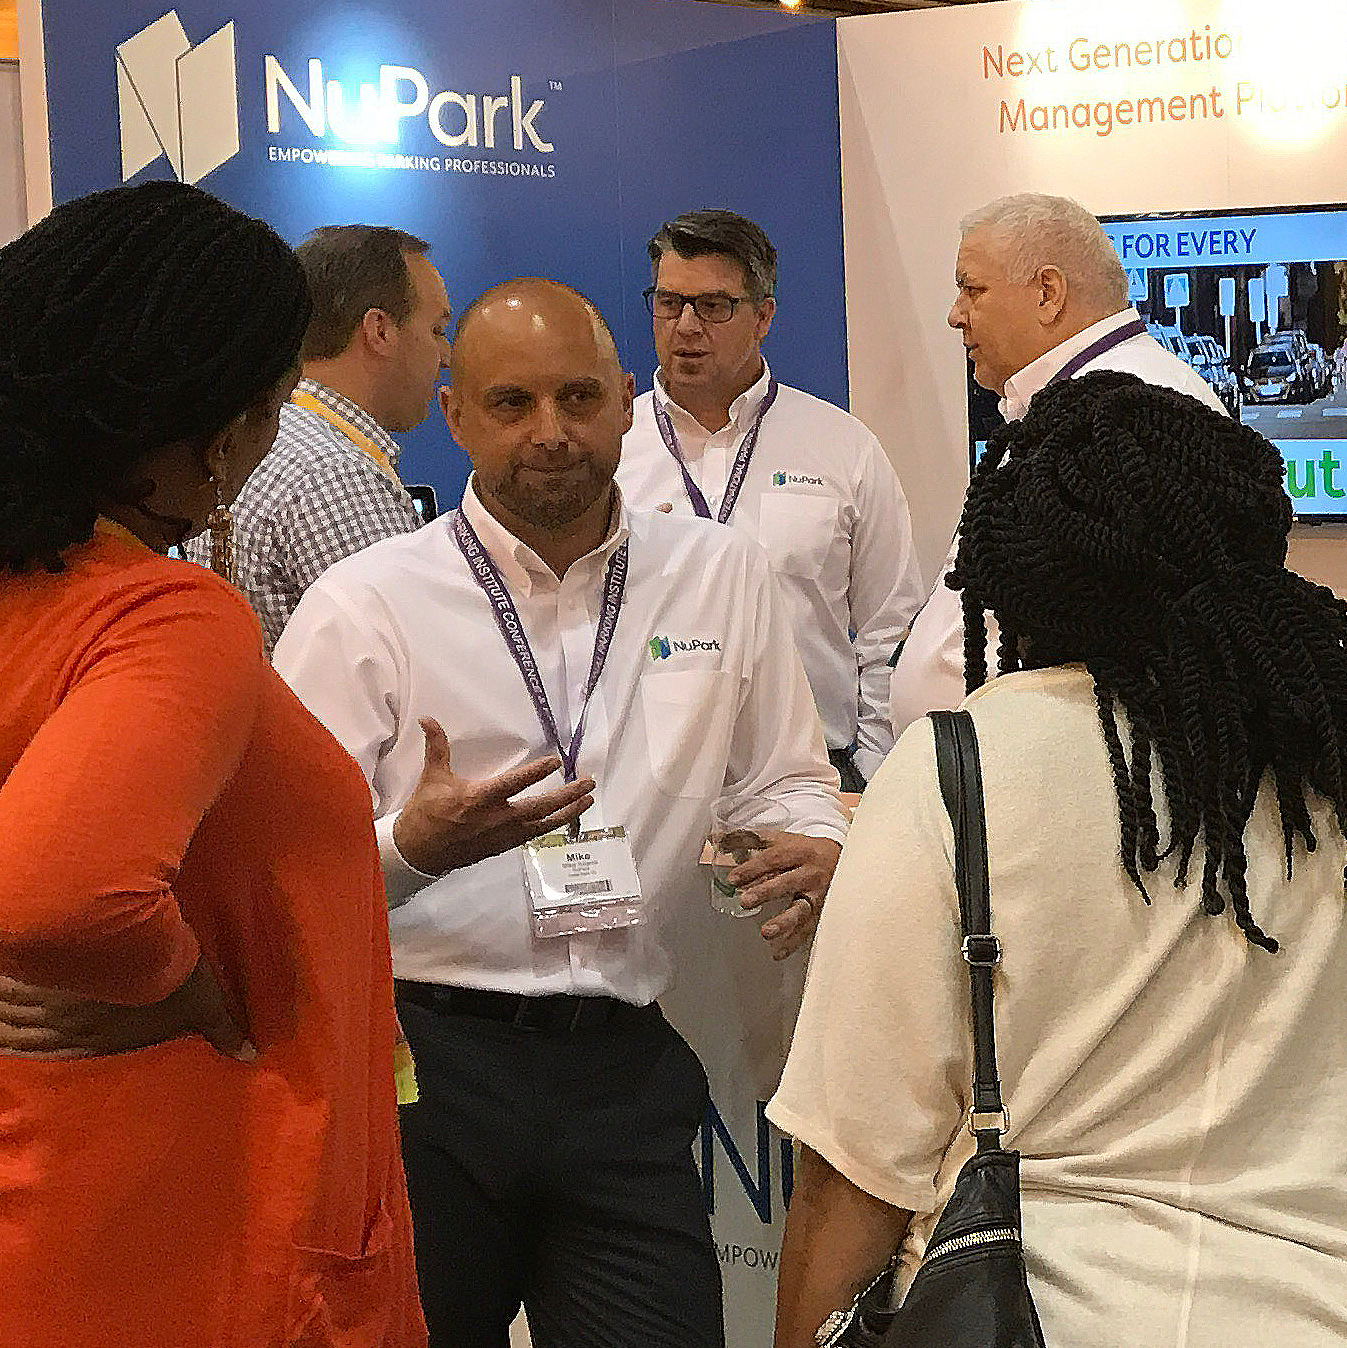 man in white shirt and black pants speaking to two ladies in white and orange clothes with men in the background talking with NuPark sign in the. back